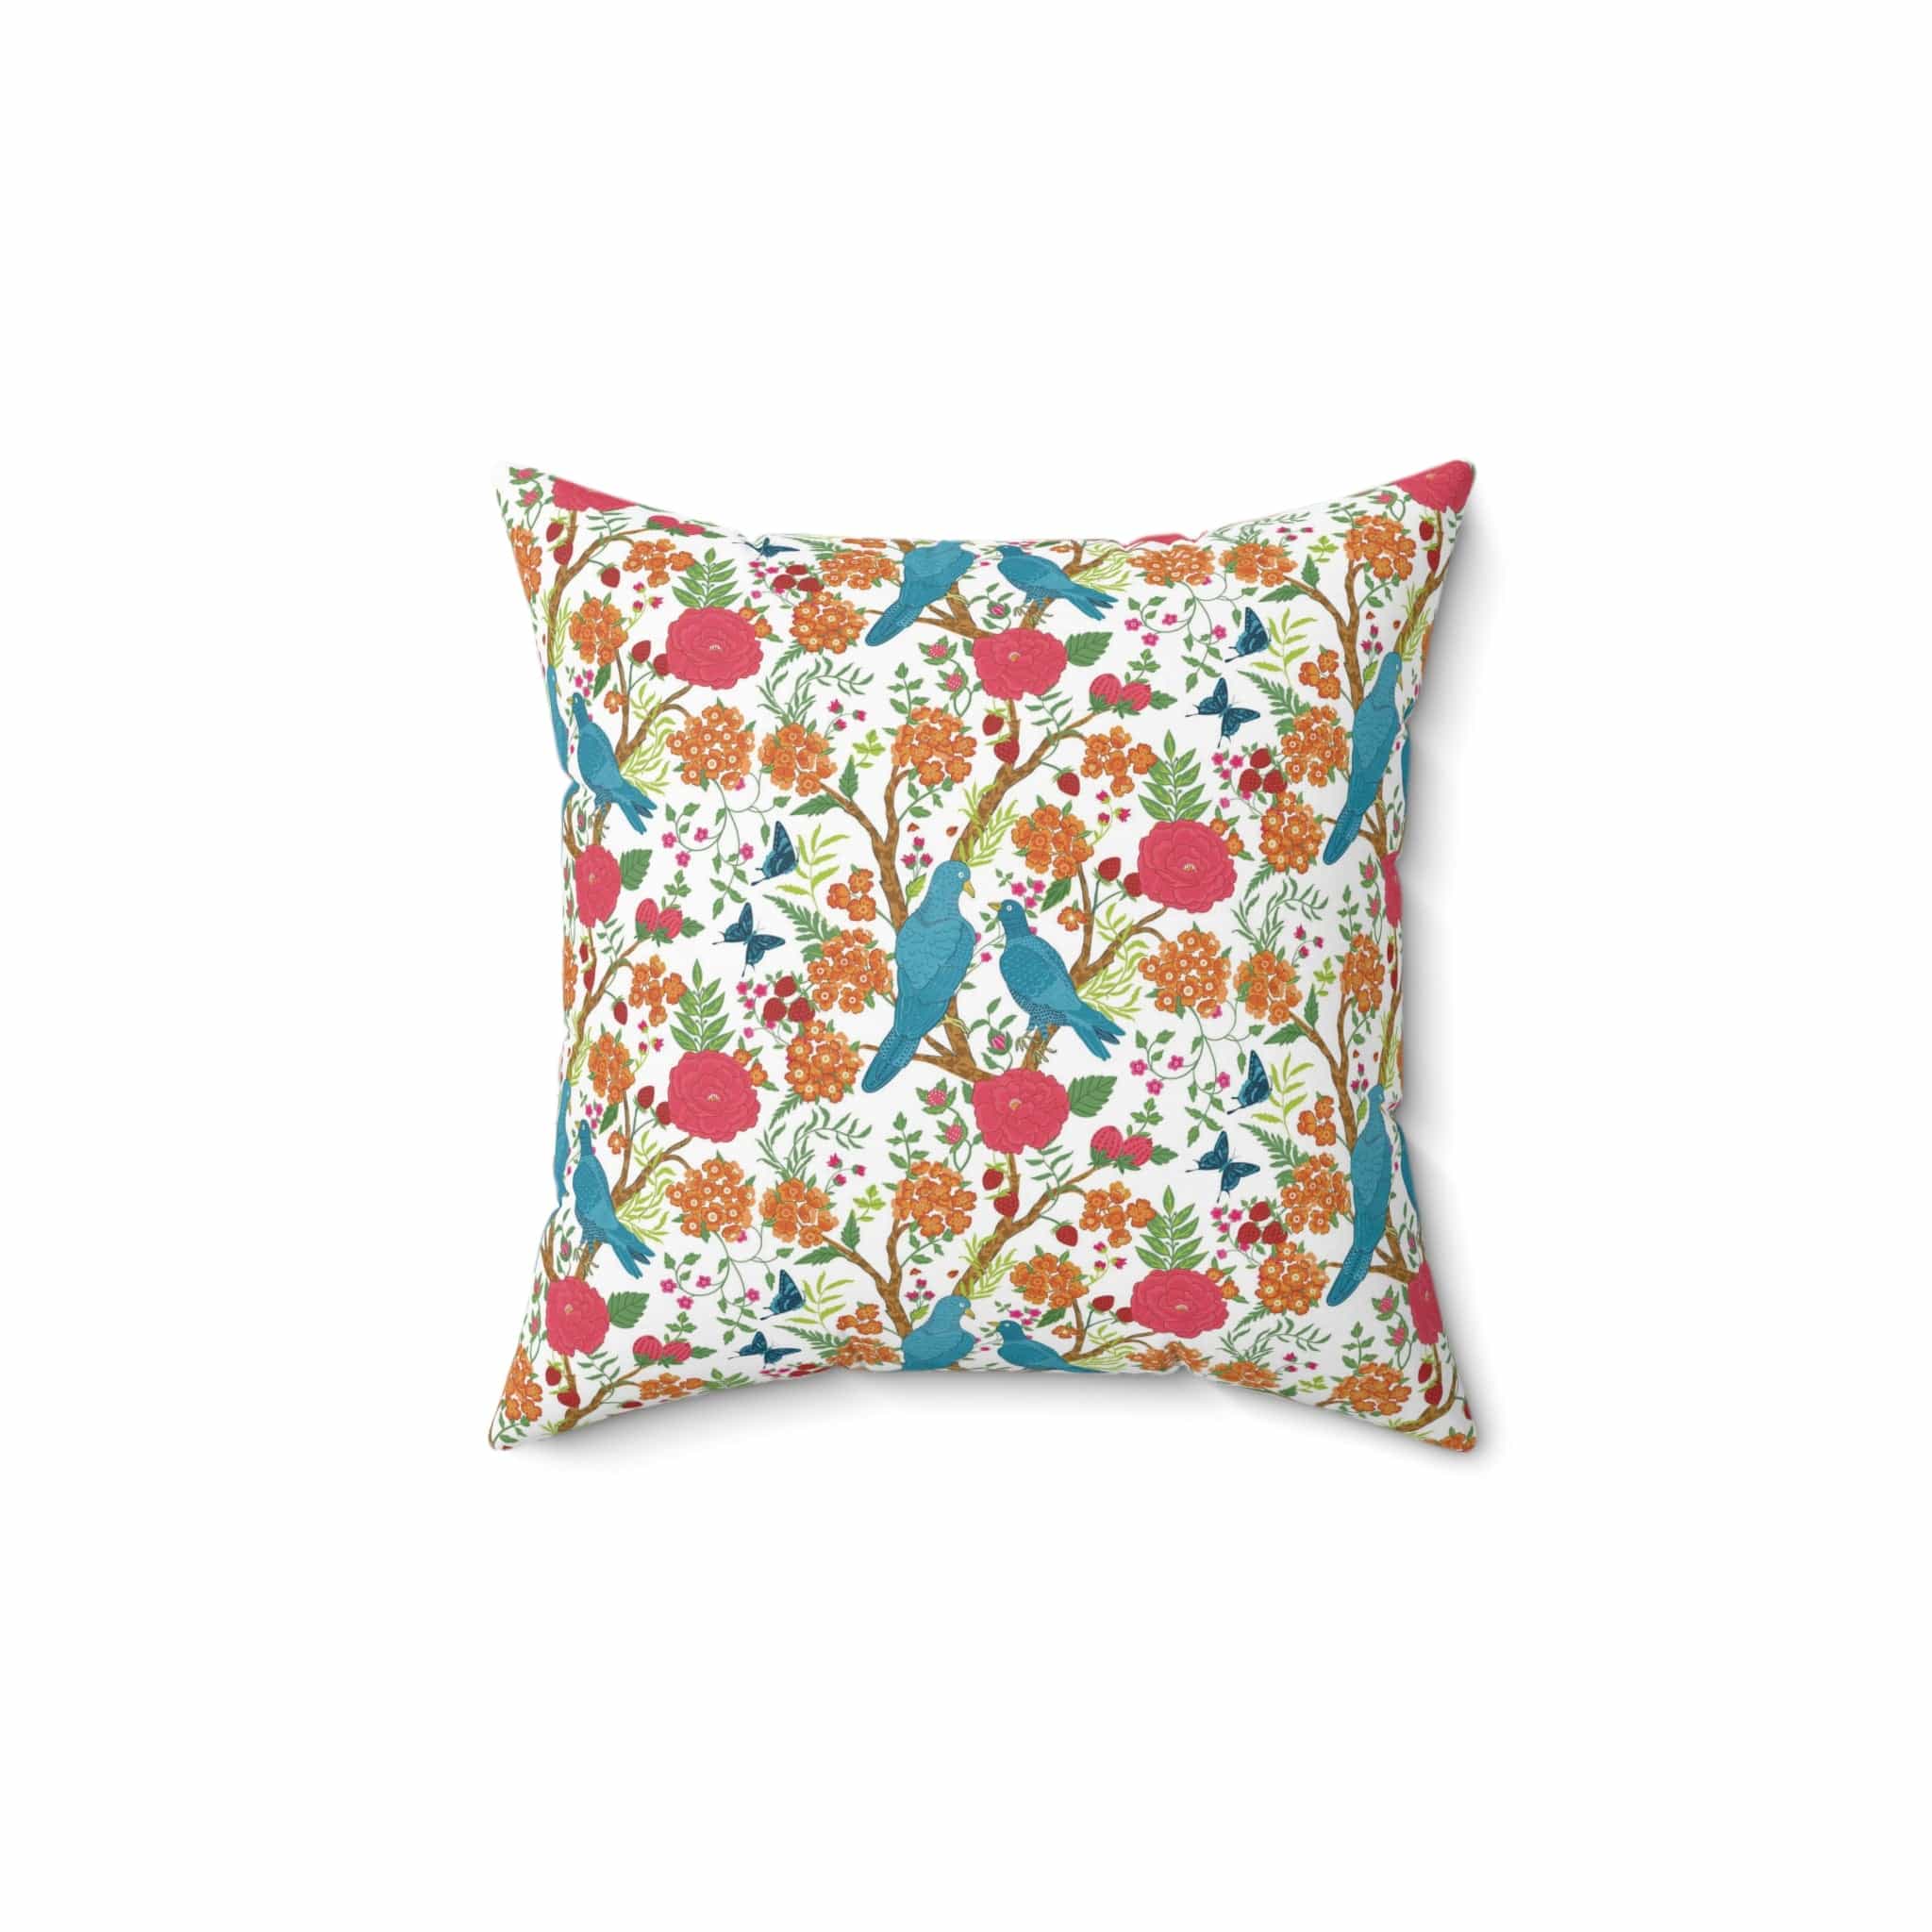 Kate McEnroe New York Chinoiserie Tropical Bird Garden Pillow with Insert, Floral Cushion, Botanical Bird Throw Pillow KM13809924 Throw Pillows